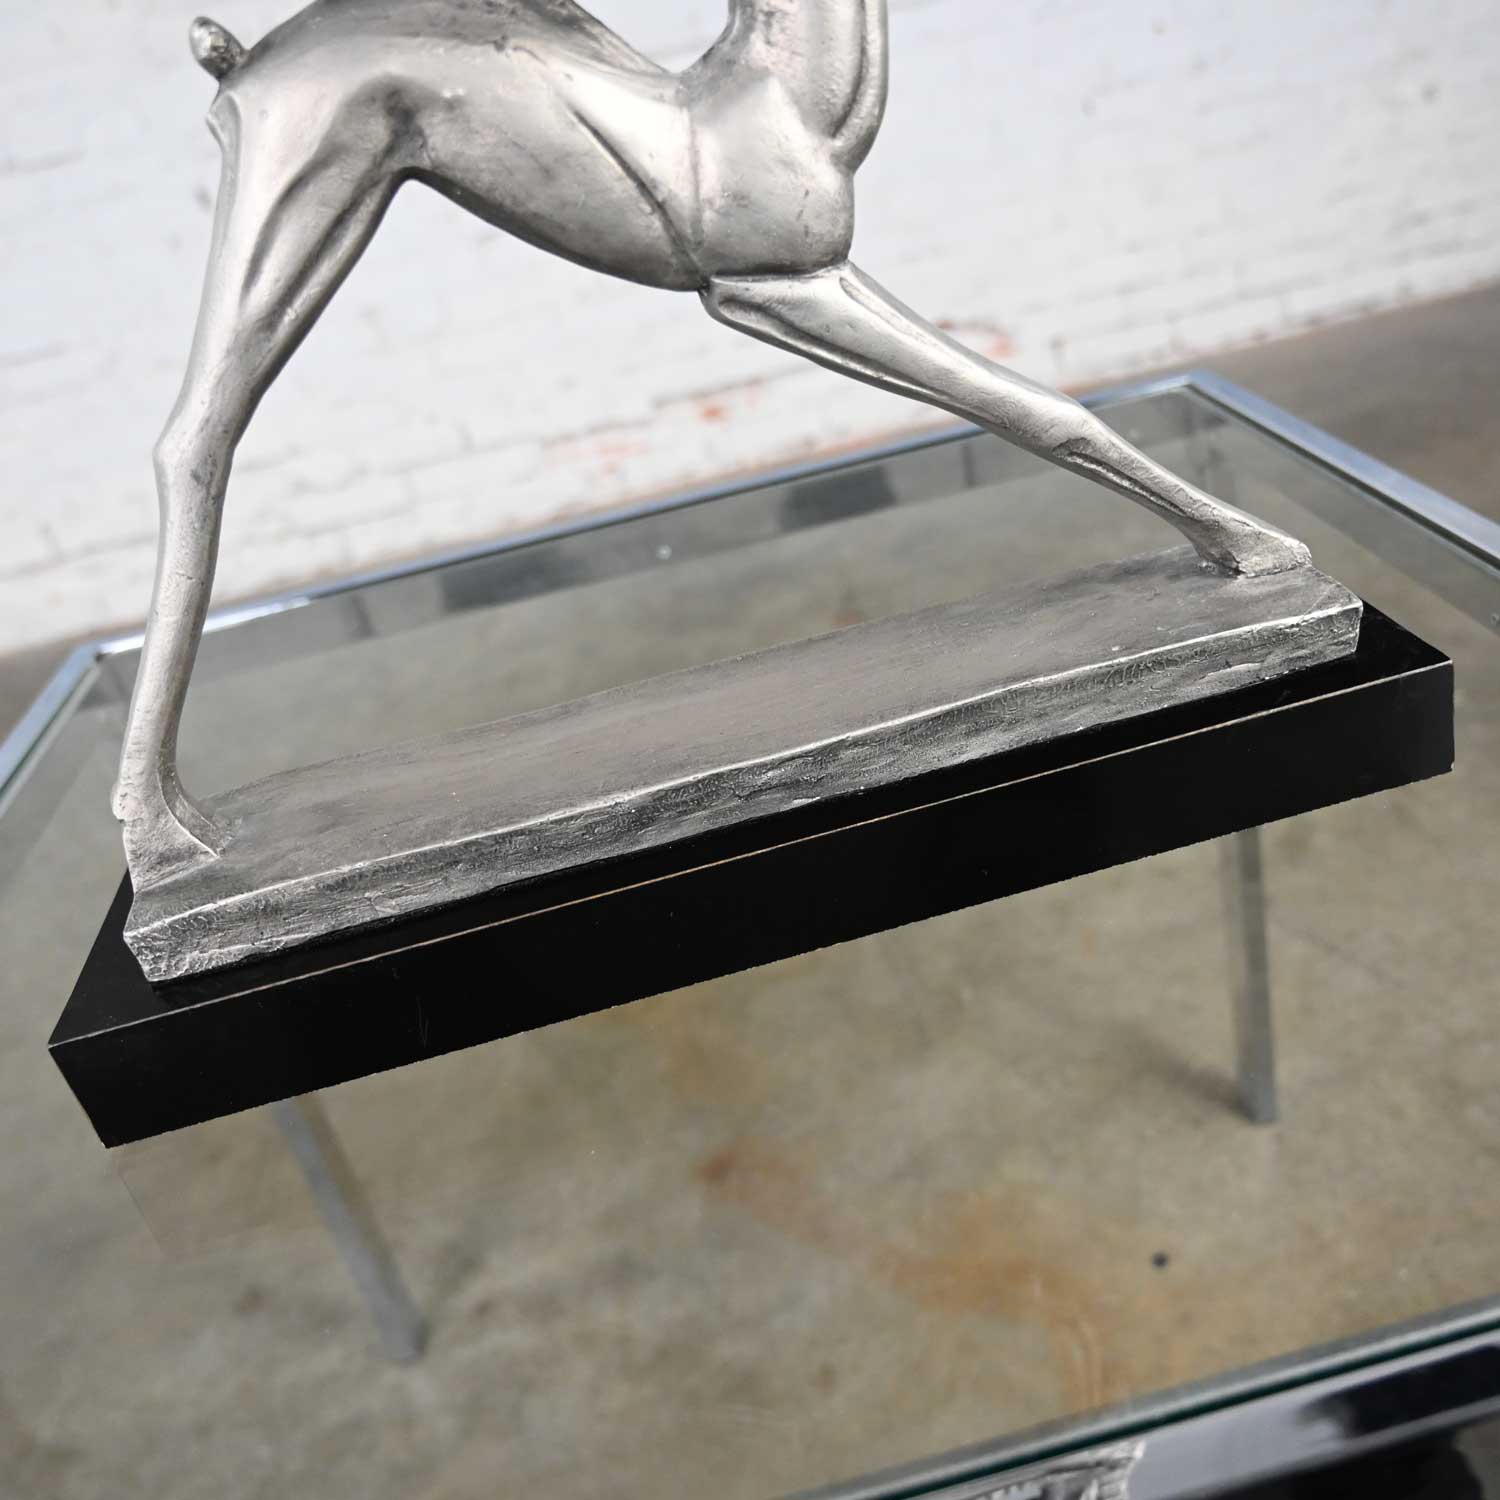 Vintage Modern or Art Deco Revival Silver Painted Ibex Ram Sculpture Signed by David Fisher for Austin Sculptures